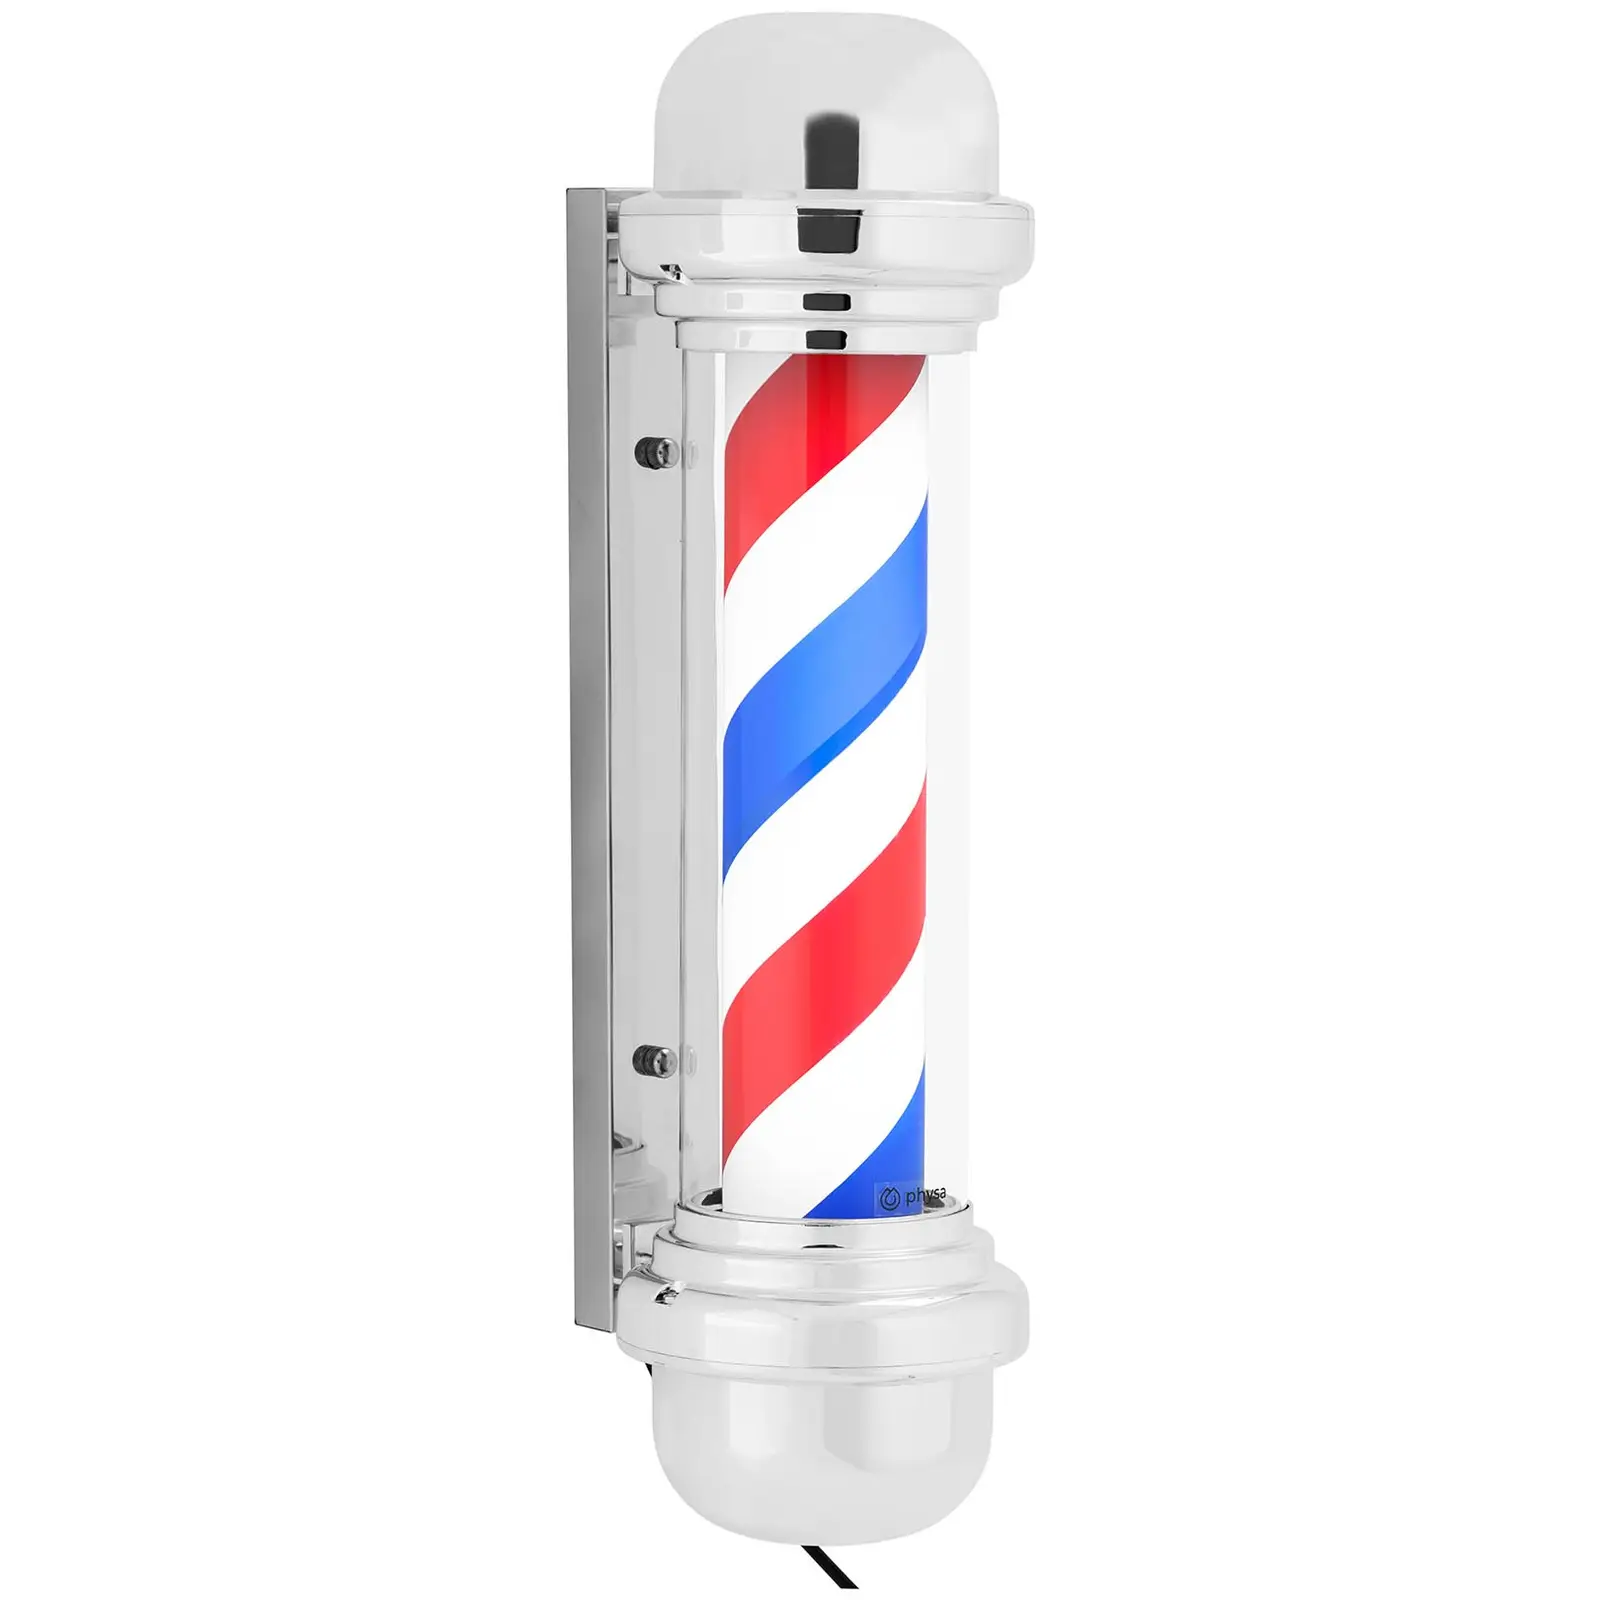 Barber Pole - rotates and illuminates - 380 mm height - 25 cm from the wall - silver frame